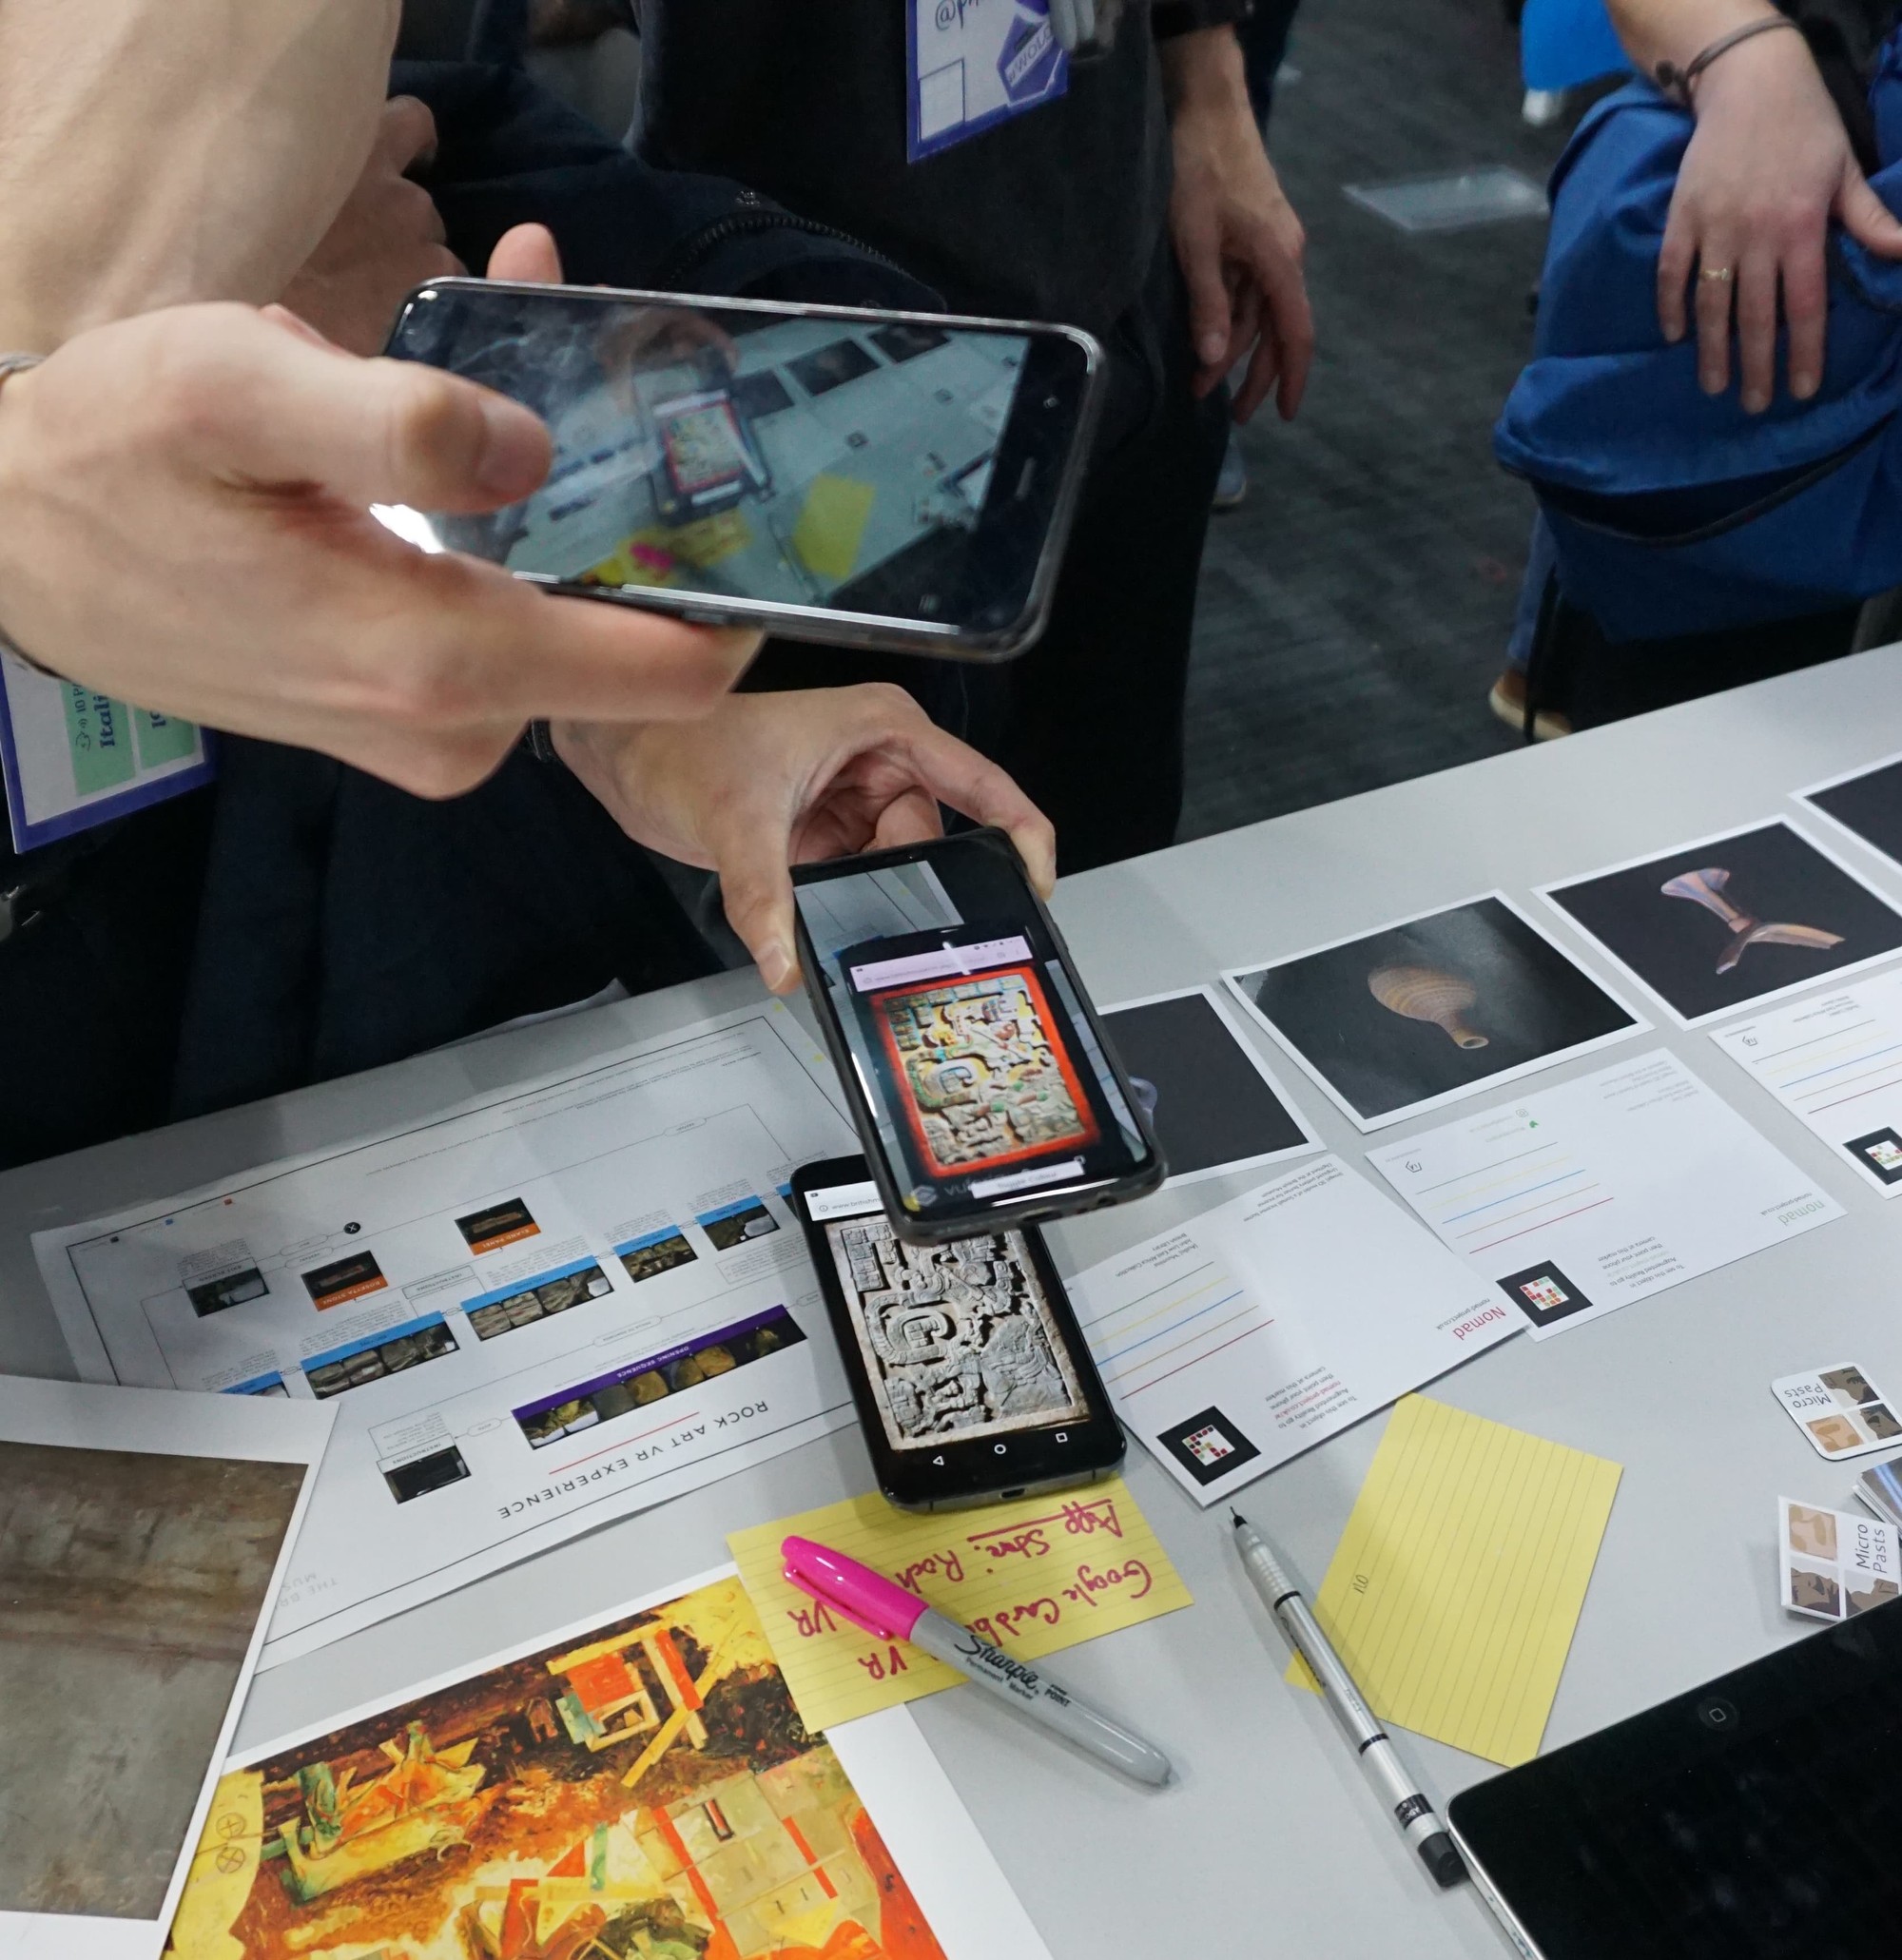 Roy's recolouring app in use at Mozfest 2018